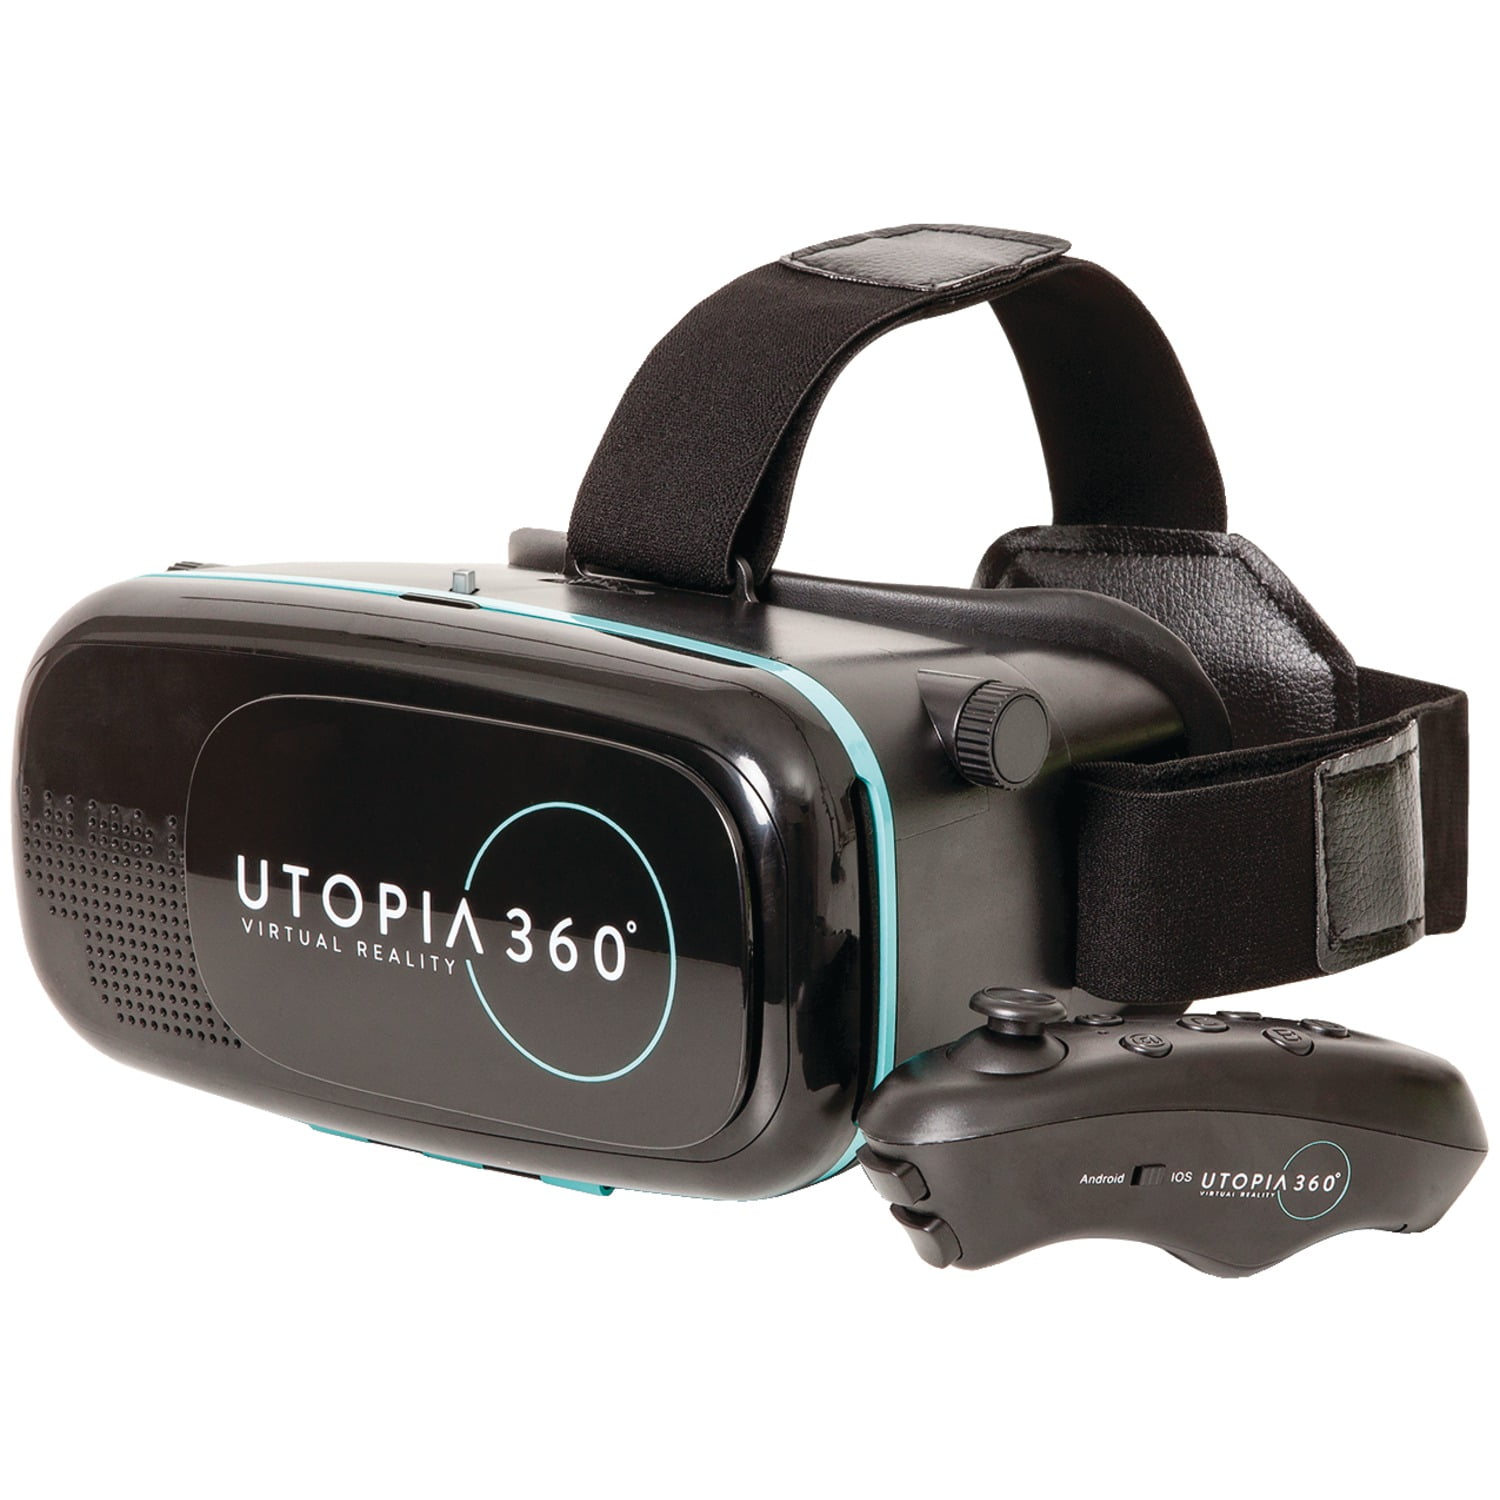 Utopia 360° VR Headset with Controller and Earbuds Compatible with iPhone and Android Smartphones Movies 2018 Virtual Reality Headset Model Apps 3D Virtual Reality Headset for Games 